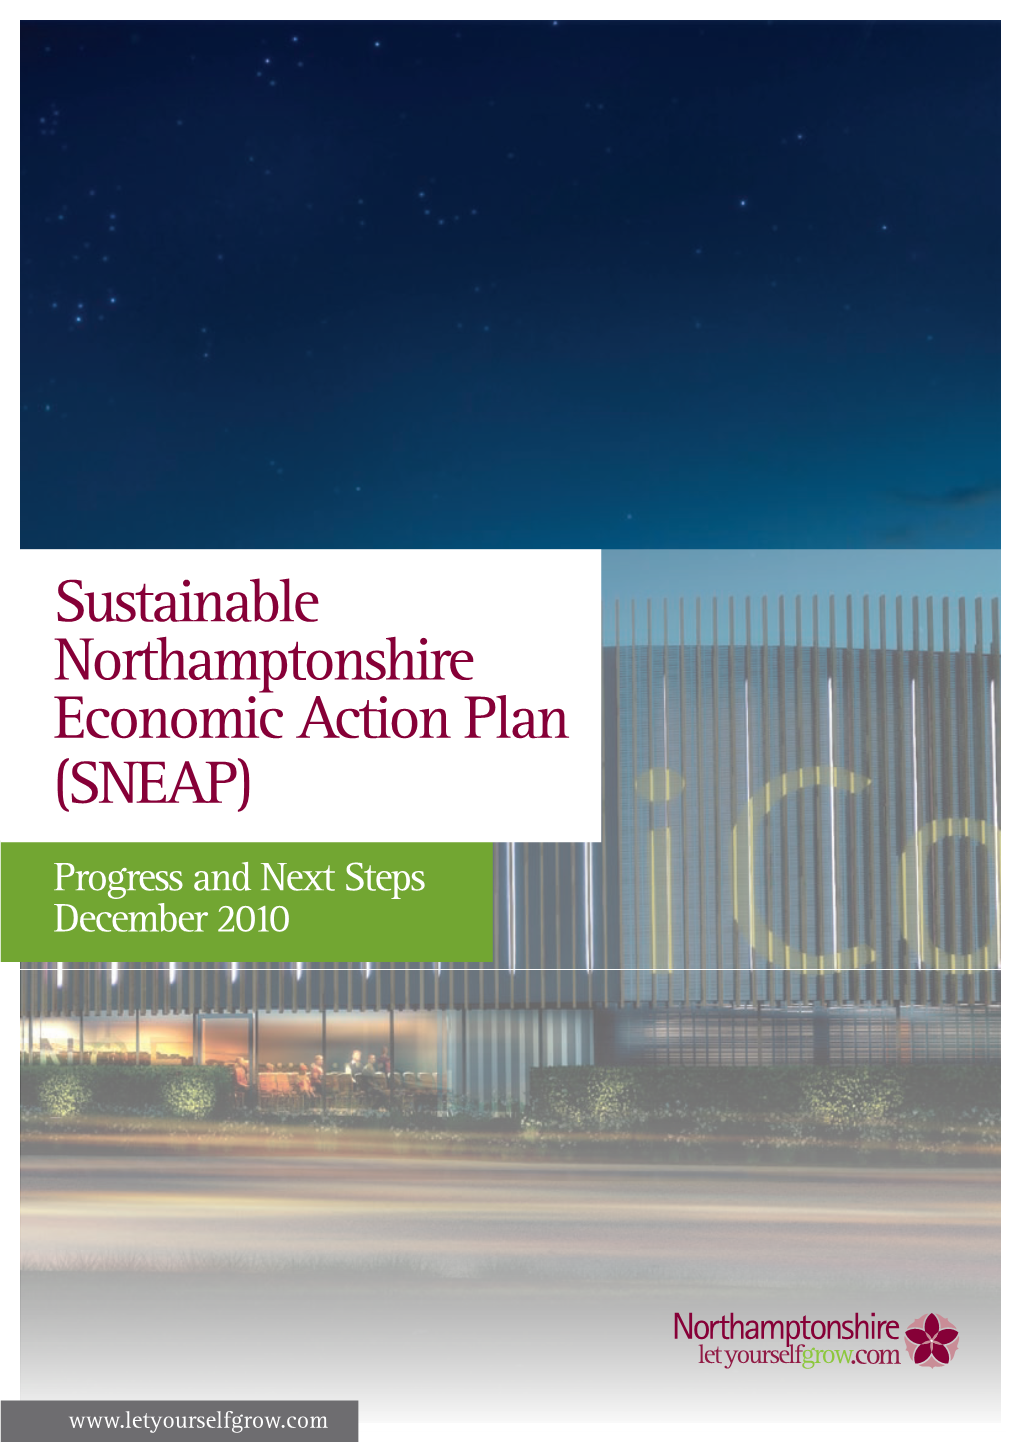 Sustainable Northamptonshire Economic Action Plan (SNEAP) Progress and Next Steps December 2010